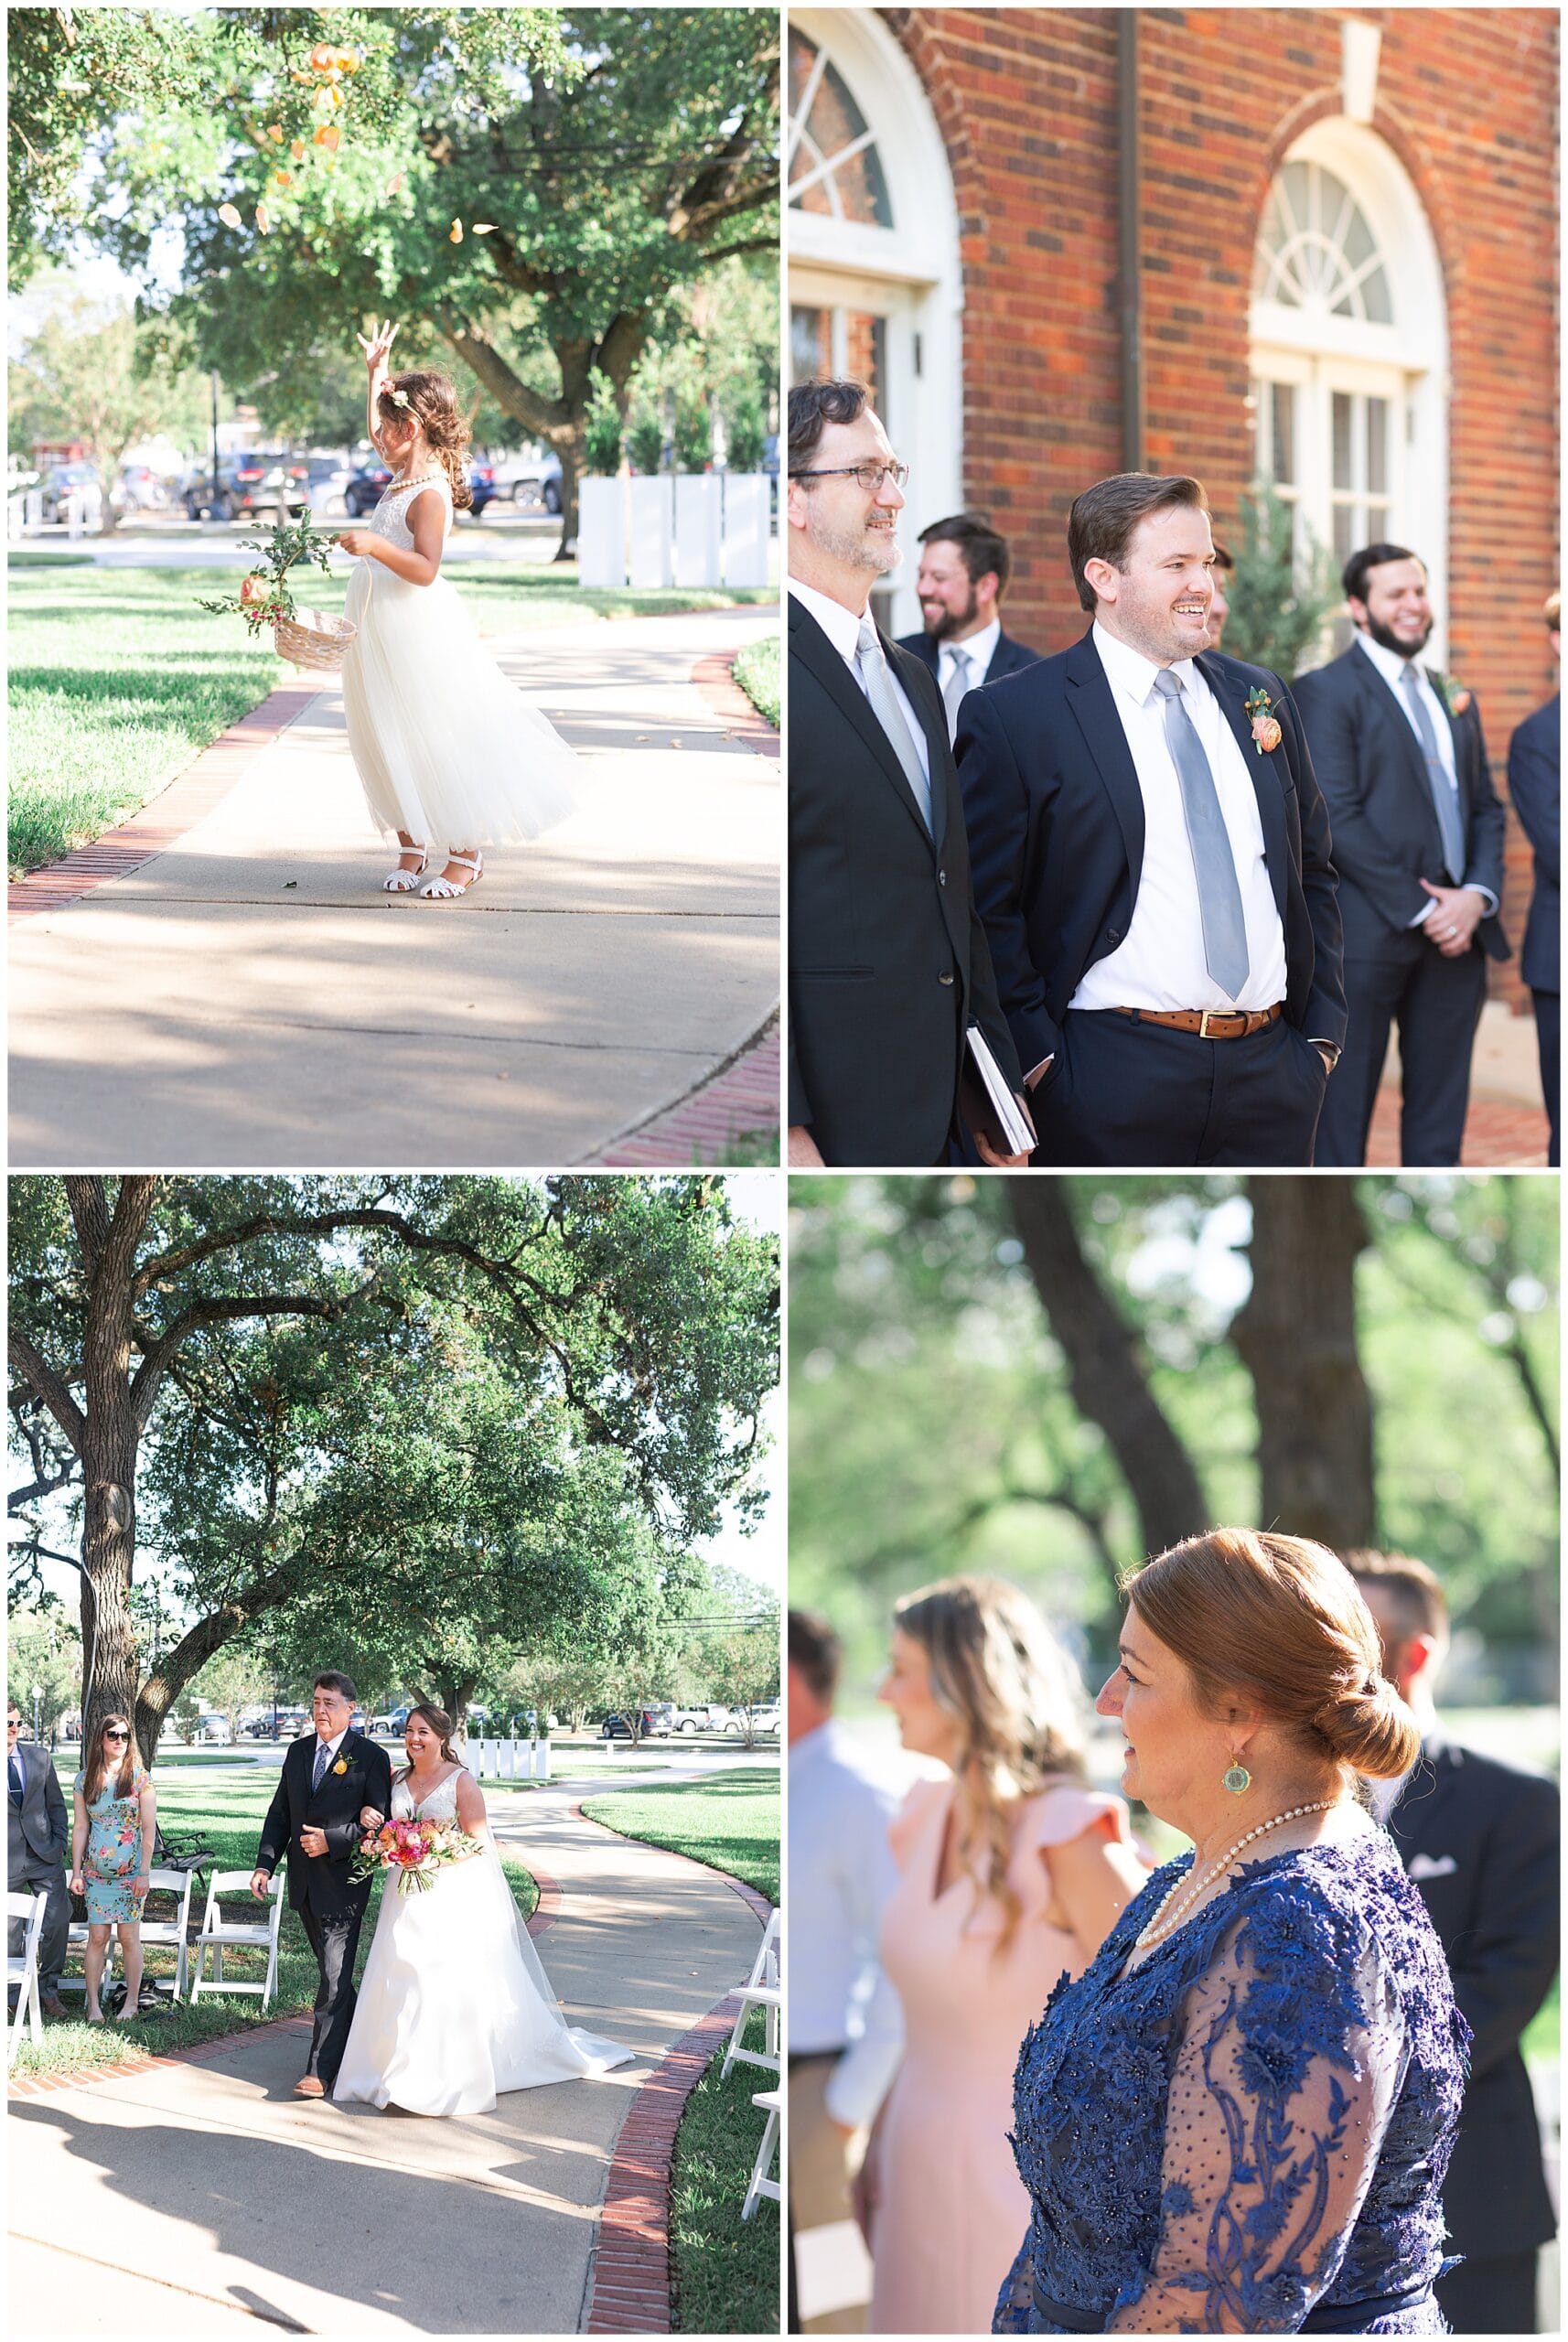 wedding ceremony walk down aisle at Astin Mansion in Bryan Texas by Swish and Click Photography